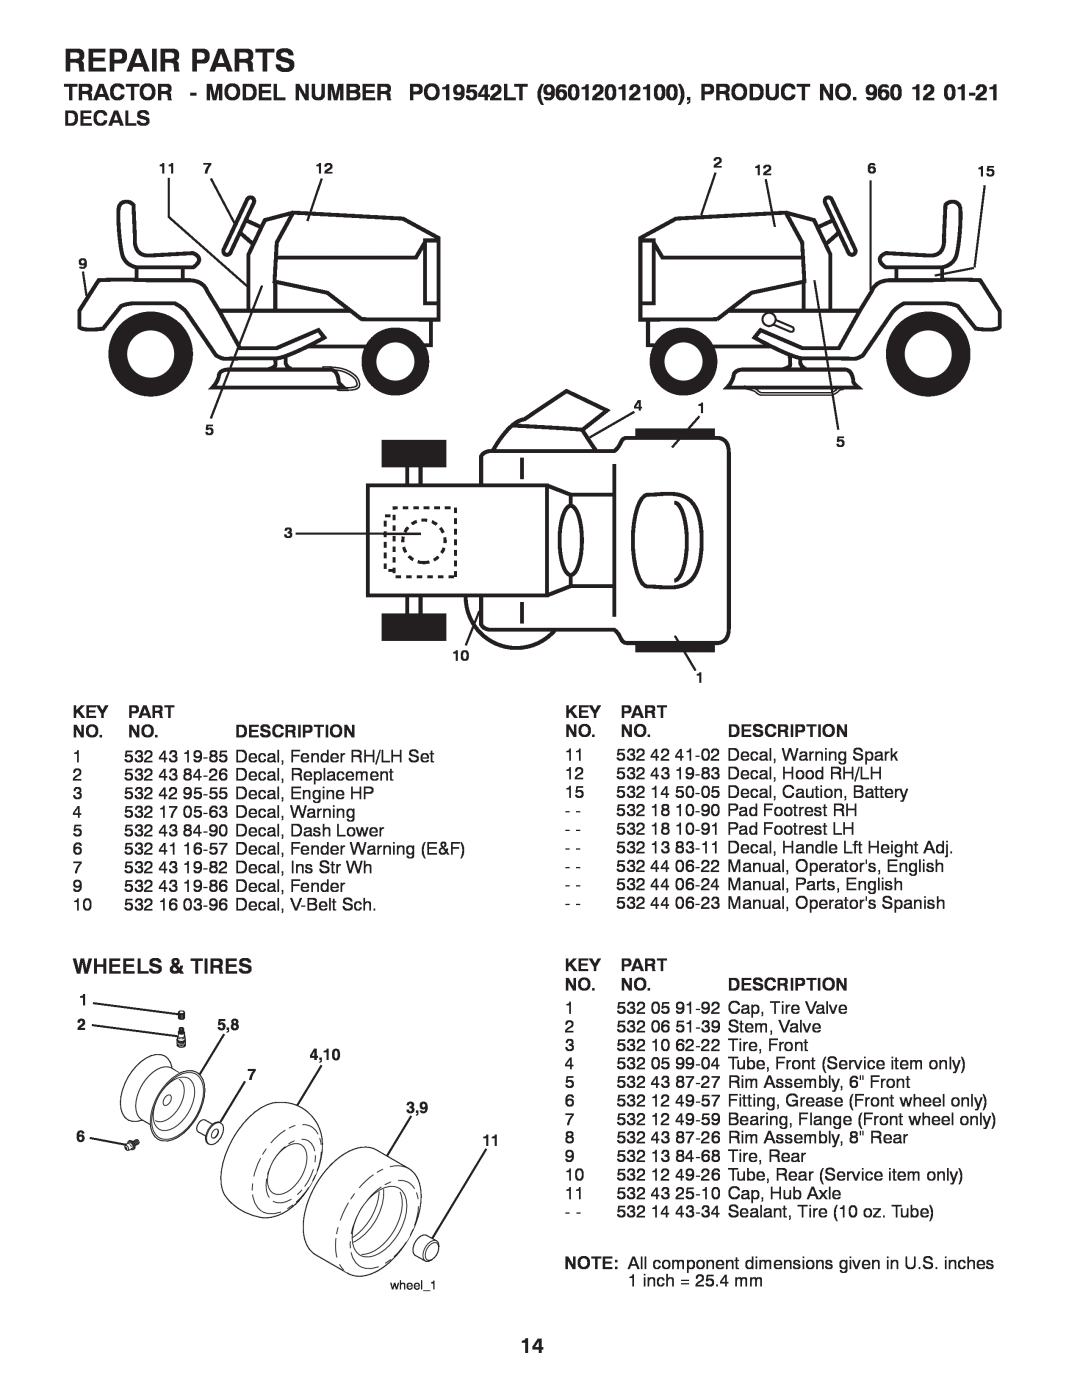 Poulan Repair Parts, TRACTOR - MODEL NUMBER PO19542LT 96012012100, PRODUCT NO, 532 43 19-85 Decal, Fender RH/LH Set 